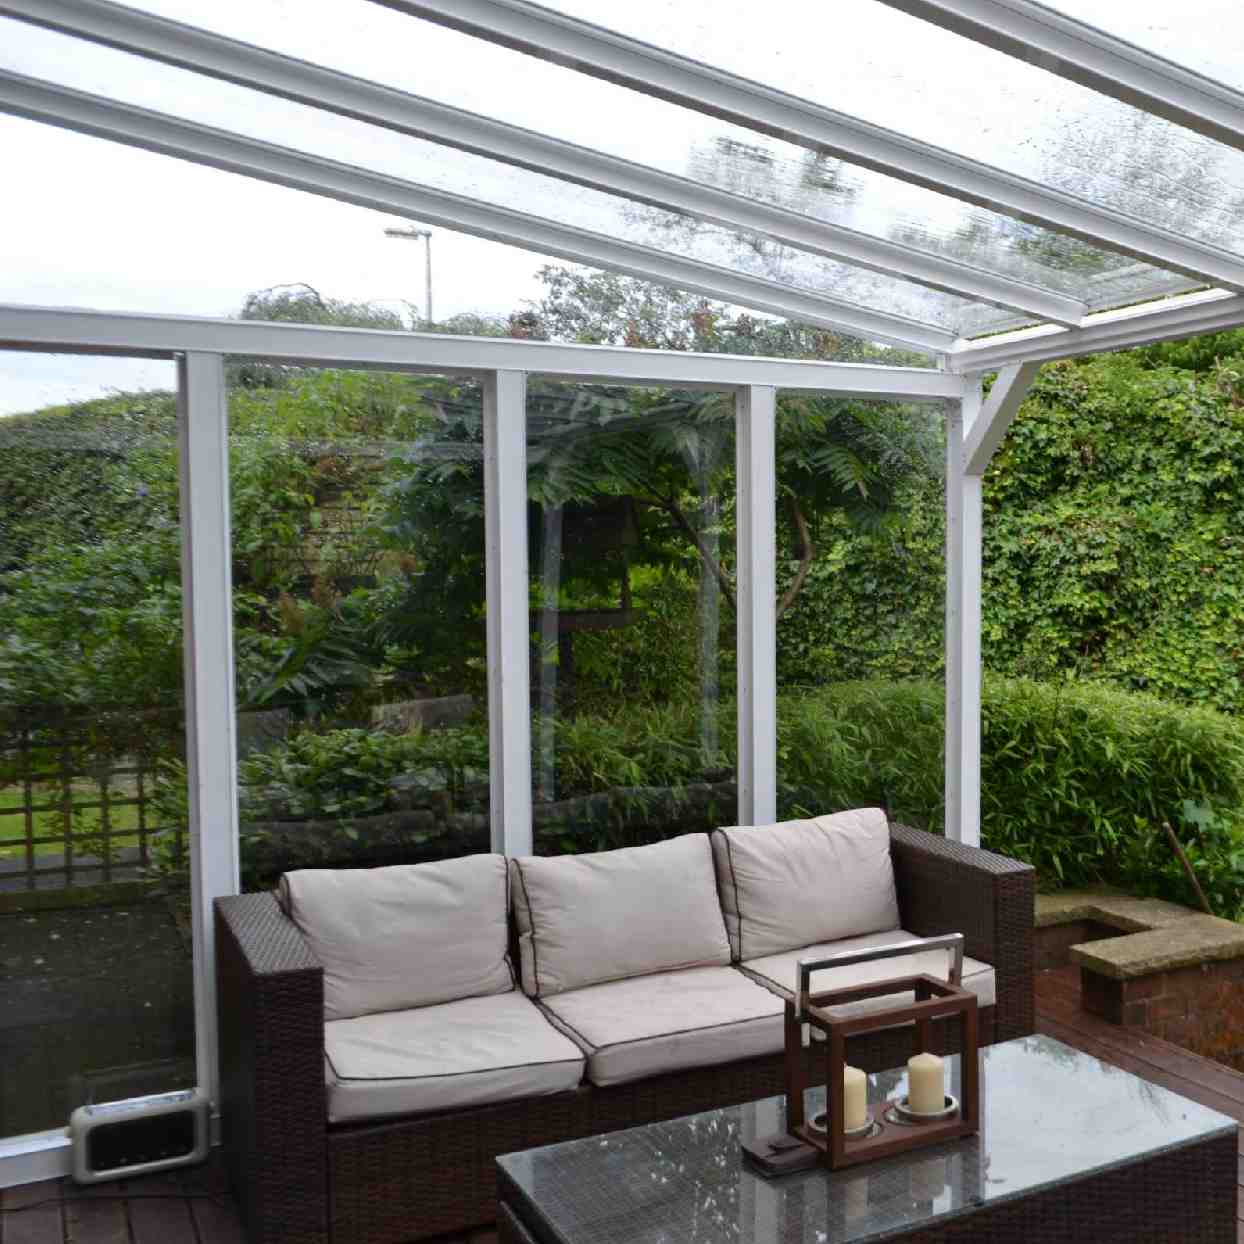 Buy Omega Verandah White with 16mm Polycarbonate Glazing - 8.4m (W) x 3.5m (P), (4) Supporting Posts online today